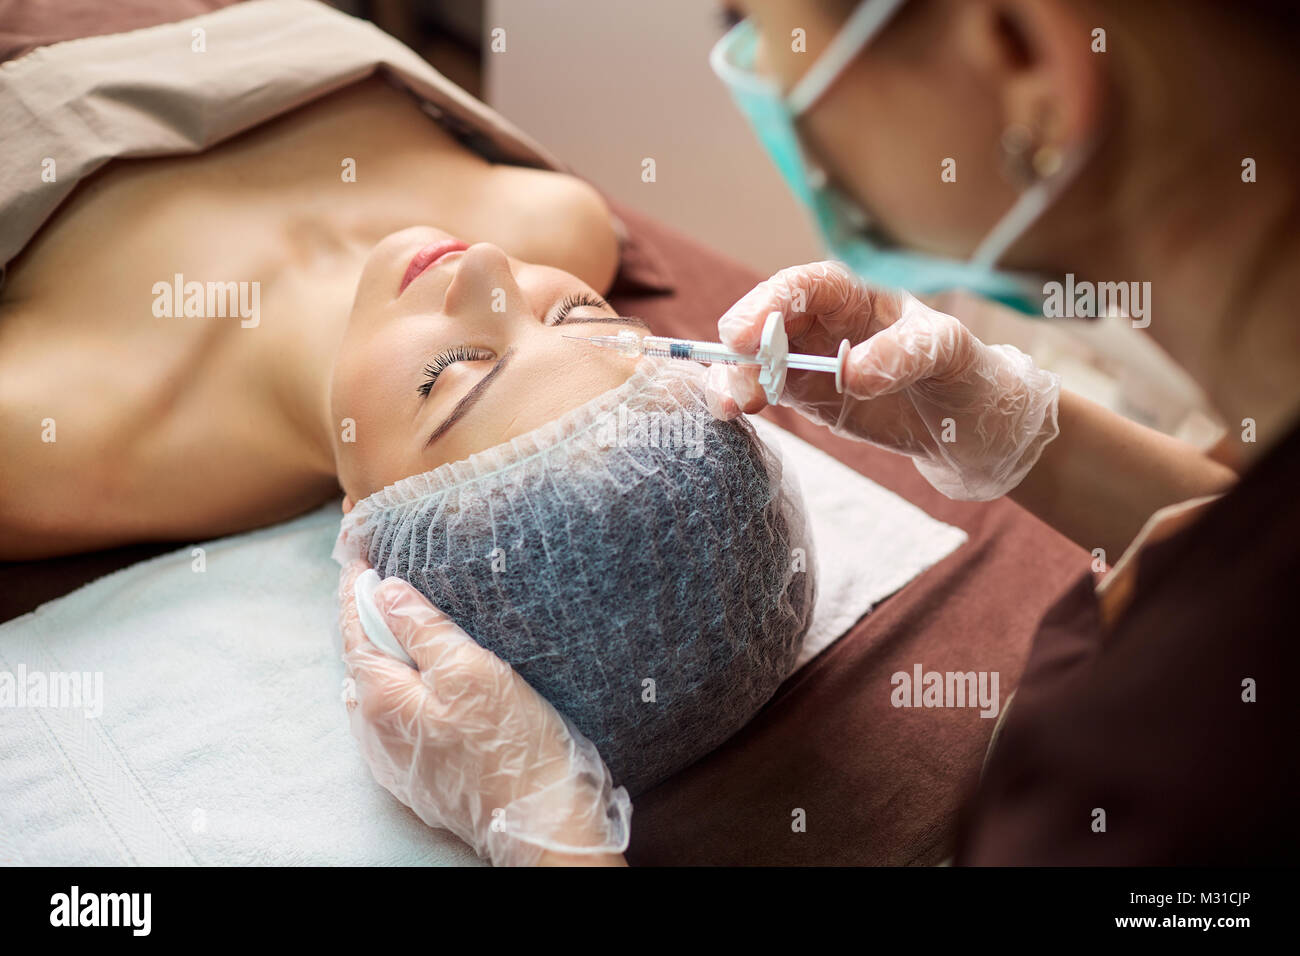 Cosmetic injection in the spa salon.  Stock Photo